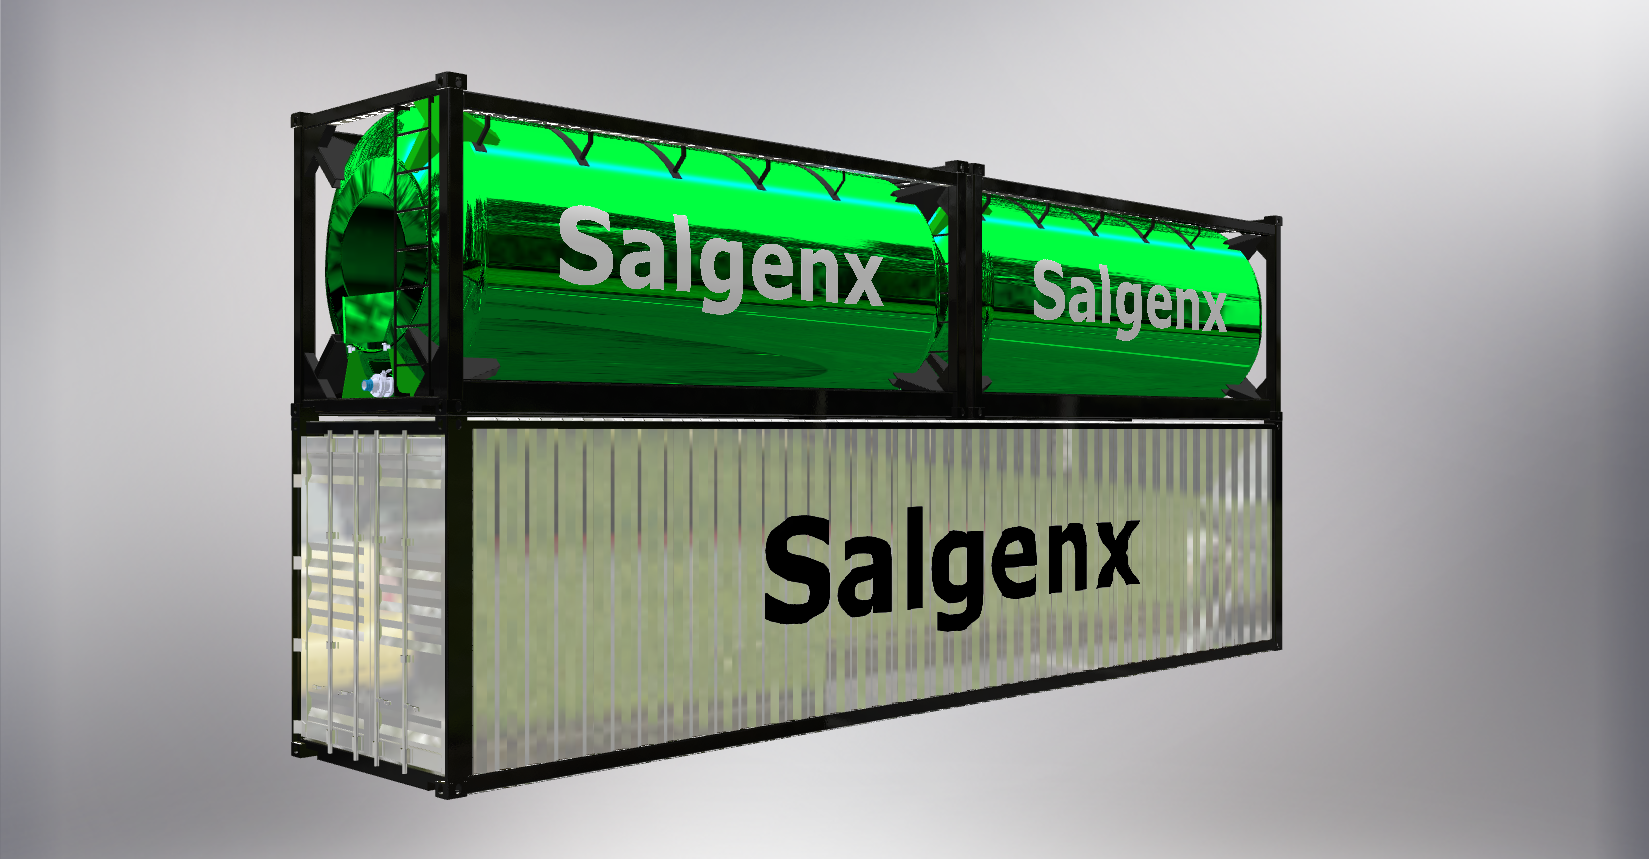 The Salgenx S3000 stores 3MW of energy with less footprint than the Capstone Turbine C1000